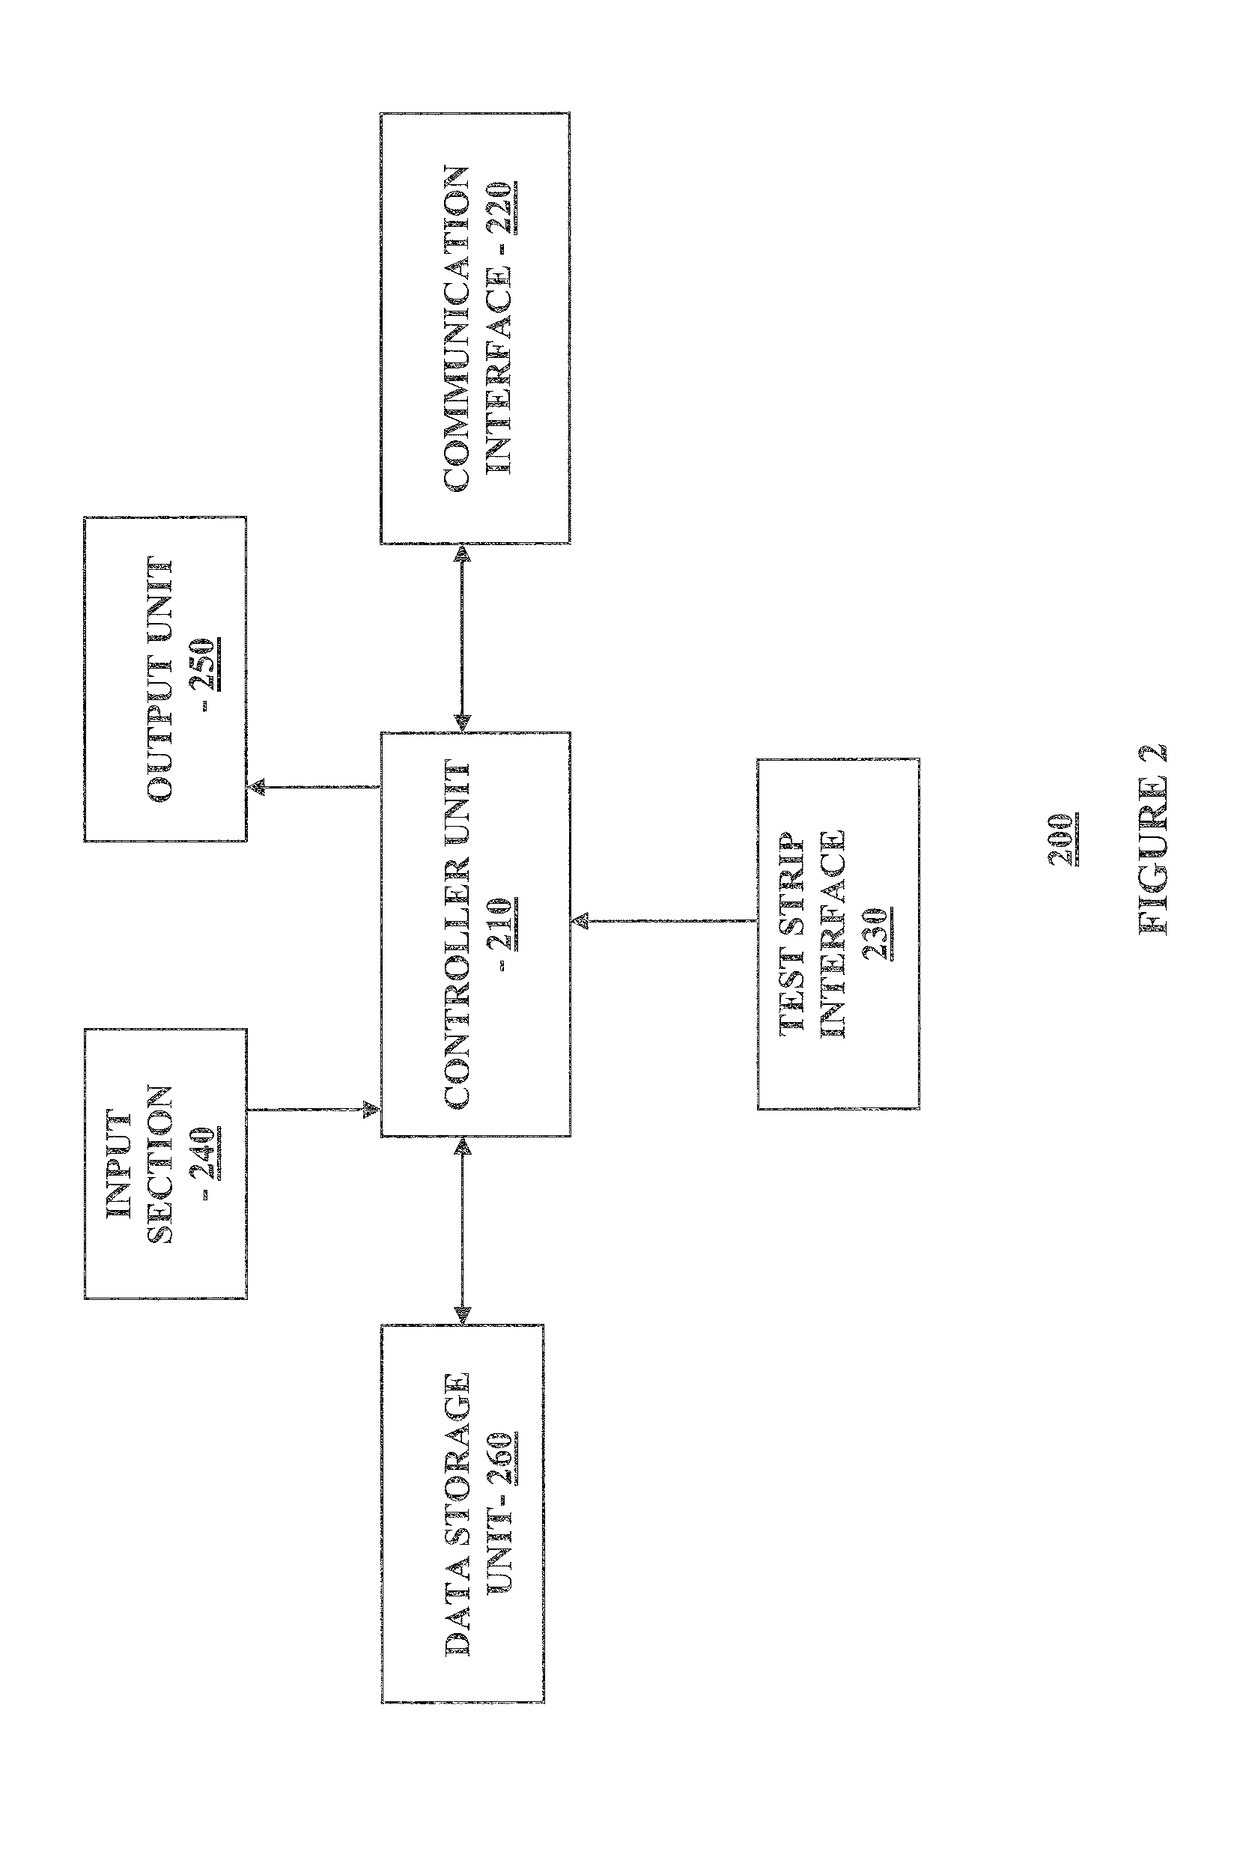 Multi-function analyte monitor device and methods of use